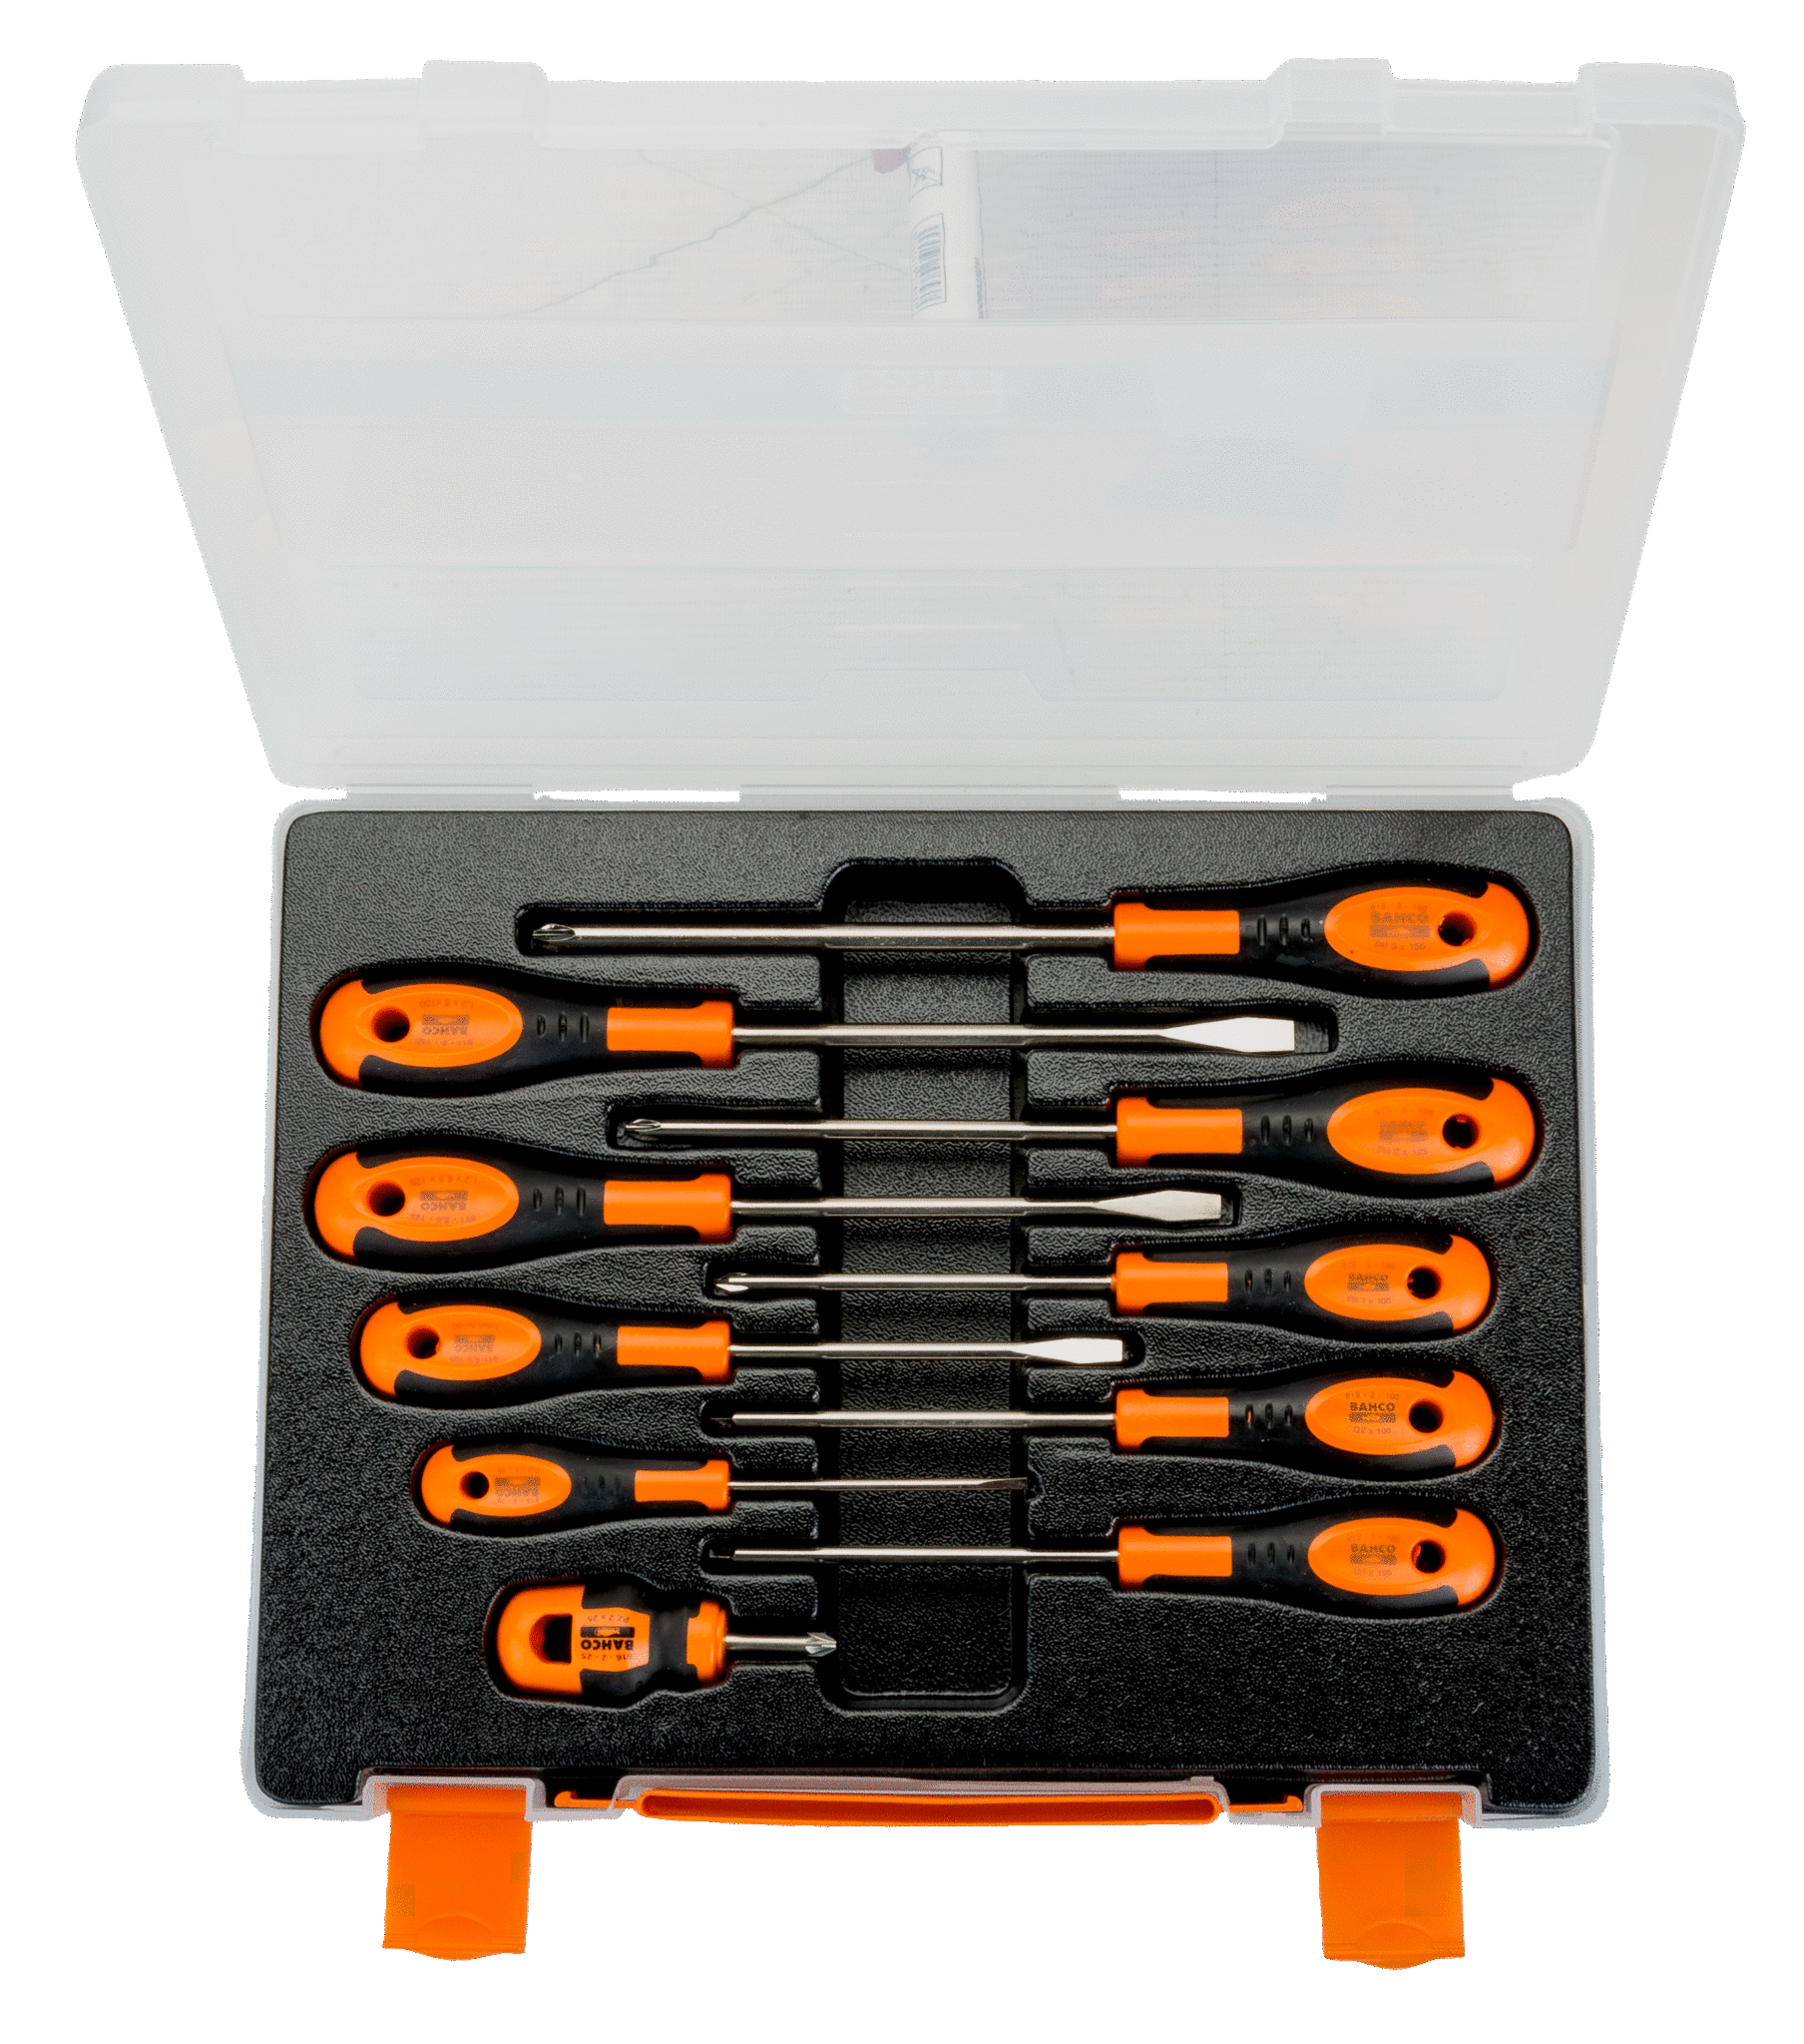 Slotted/Phillips/Robertson Screwdriver Set with Rubber Grip 10 Pcs - 605-10-PC-AU by Bahco